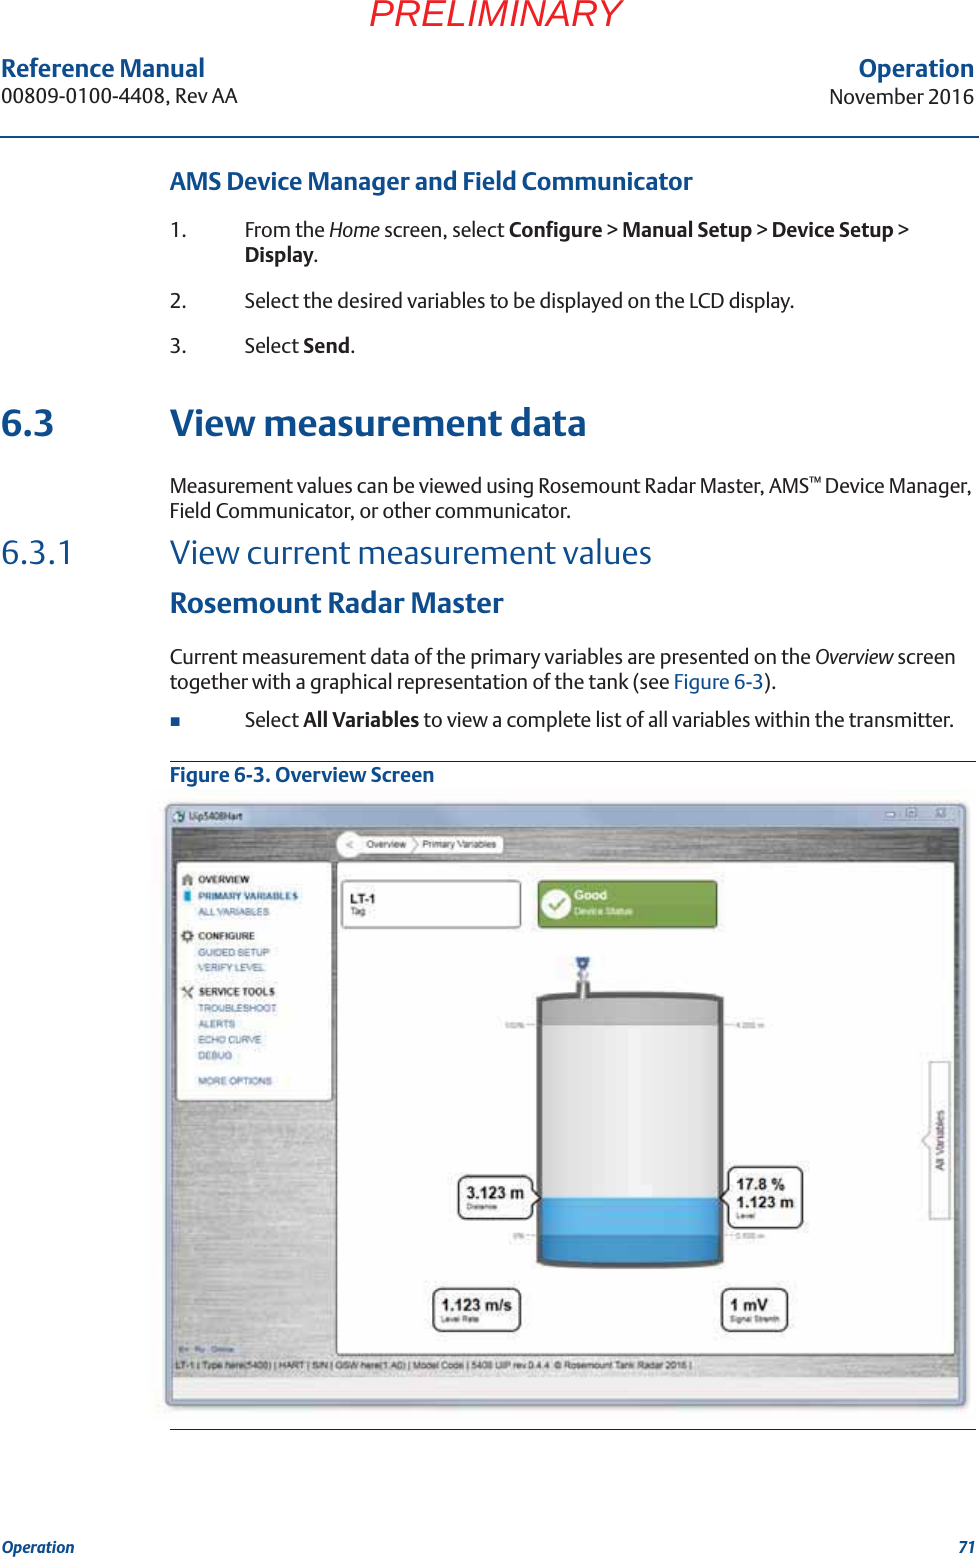 71Reference Manual 00809-0100-4408, Rev AAOperationNovember 2016OperationPRELIMINARYAMS Device Manager and Field Communicator 1. From the Home screen, select Configure &gt; Manual Setup &gt; Device Setup &gt; Display.2. Select the desired variables to be displayed on the LCD display.3. Select Send.6.3 View measurement dataMeasurement values can be viewed using Rosemount Radar Master, AMS™ Device Manager, Field Communicator, or other communicator.6.3.1 View current measurement valuesRosemount Radar MasterCurrent measurement data of the primary variables are presented on the Overview screen together with a graphical representation of the tank (see Figure 6-3).Select All Variables to view a complete list of all variables within the transmitter.Figure 6-3. Overview Screen